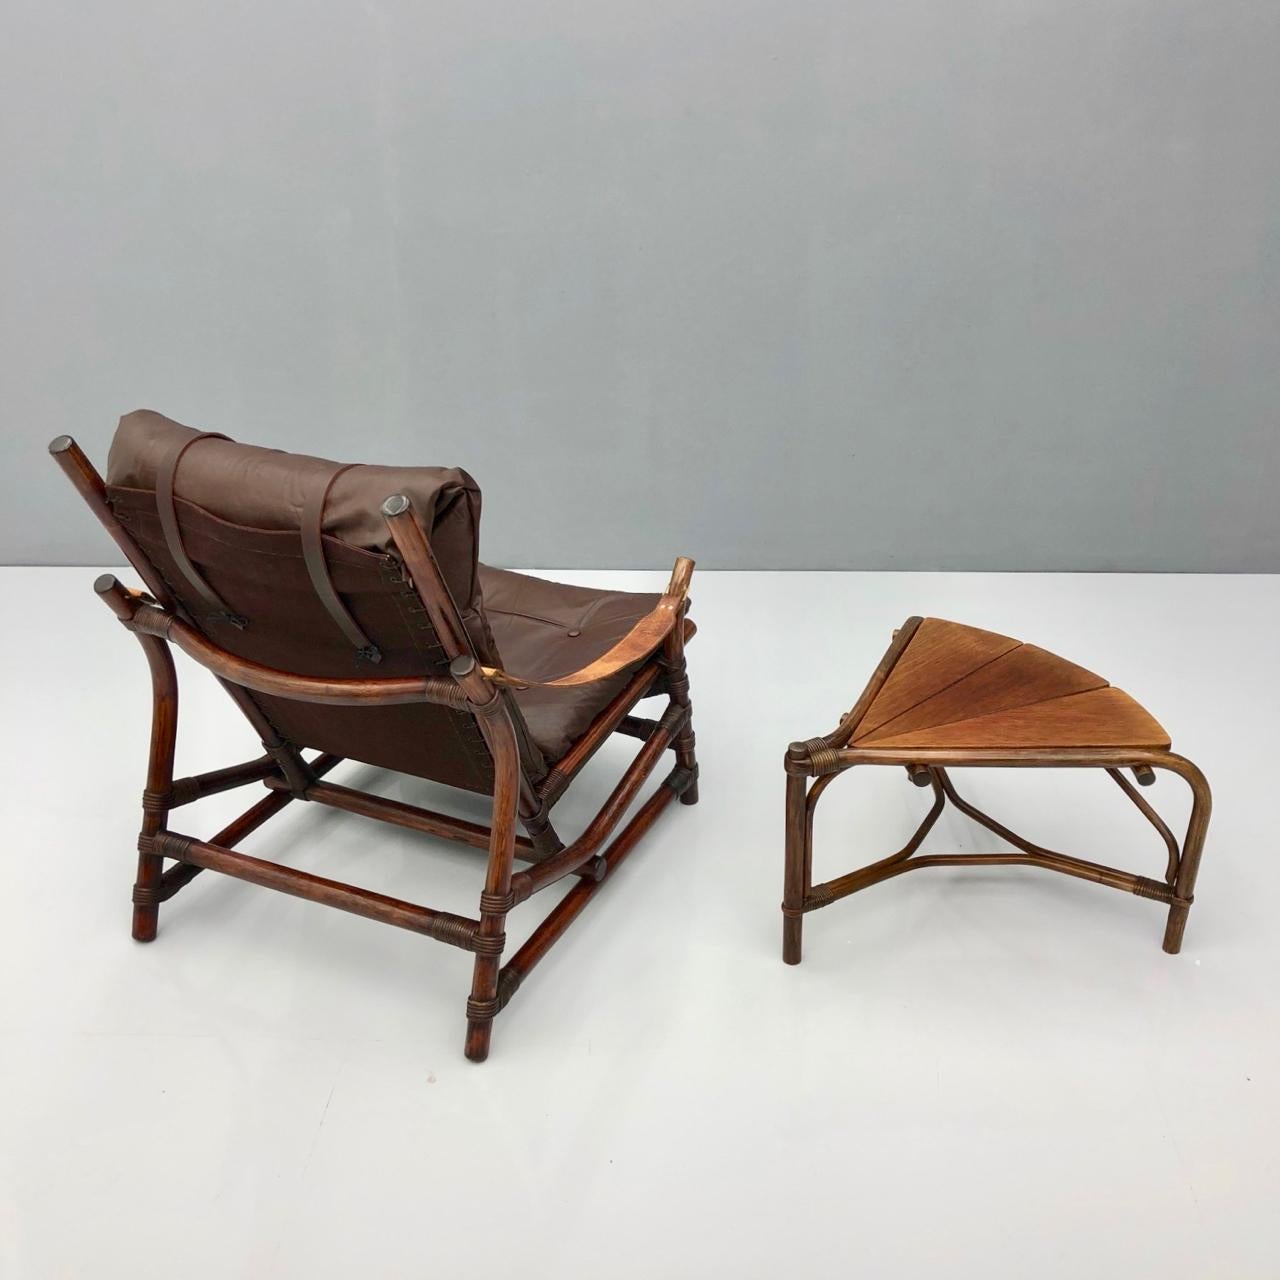 Leather Bamboo Lounge Chair with a Table, 1960s For Sale 8